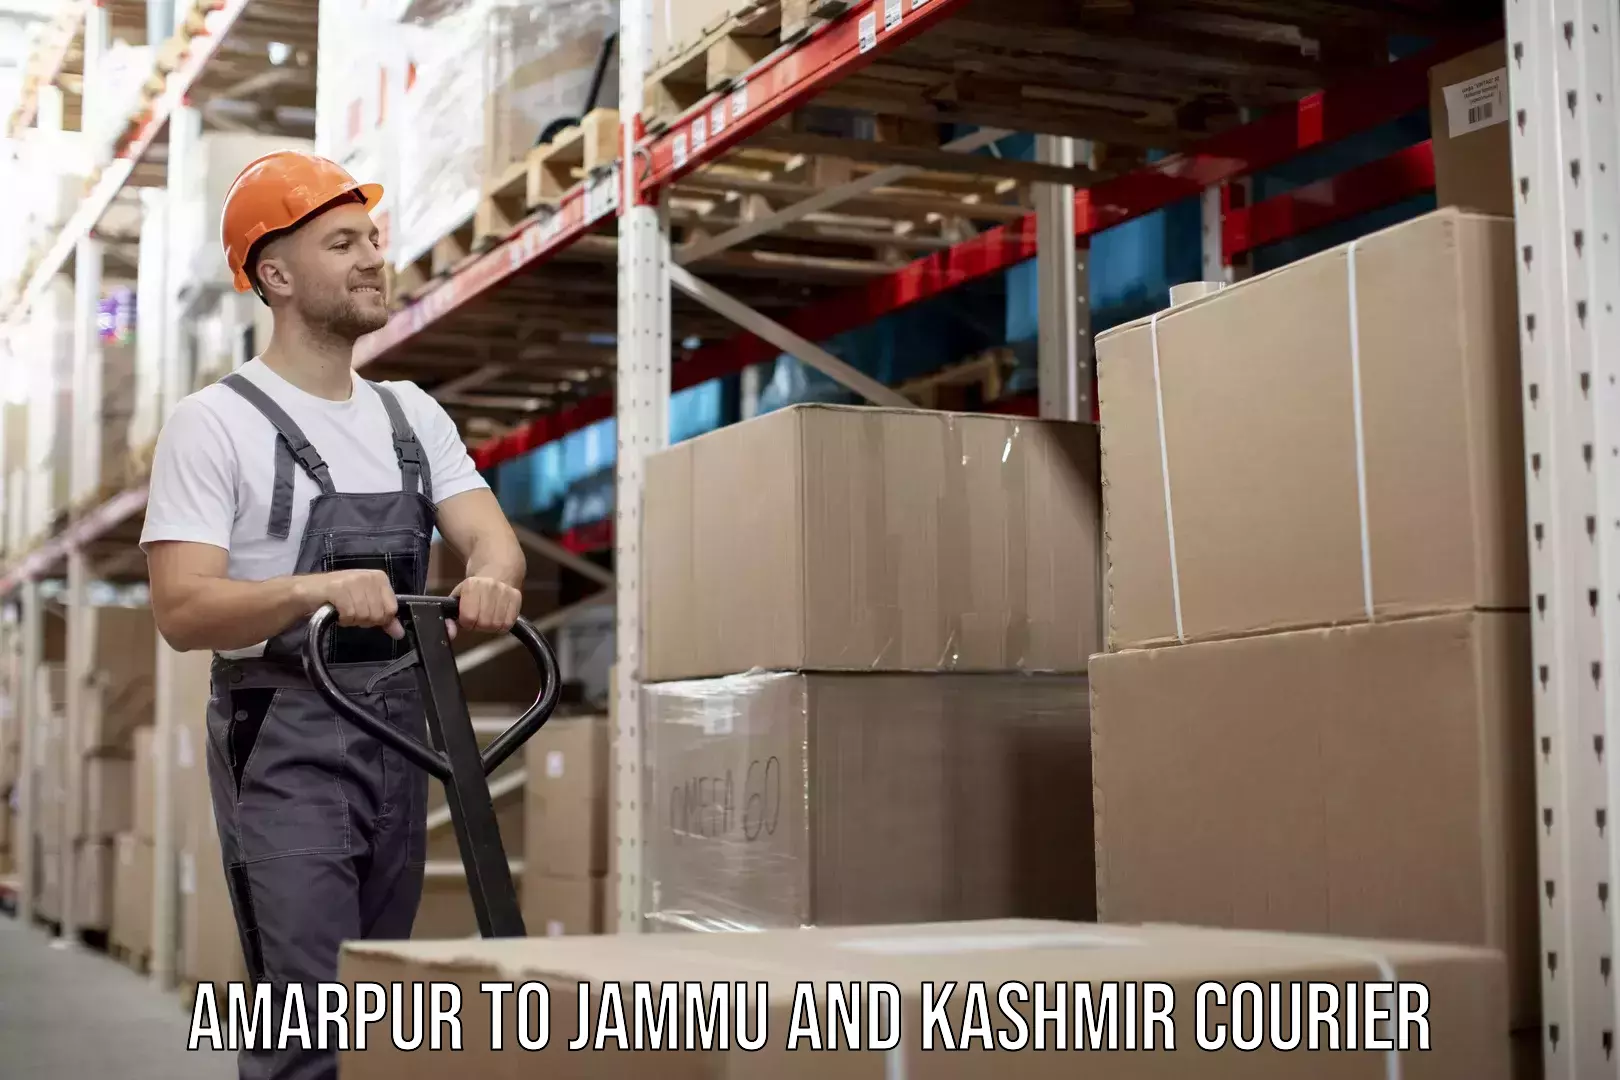 Sustainable shipping practices Amarpur to Jammu and Kashmir